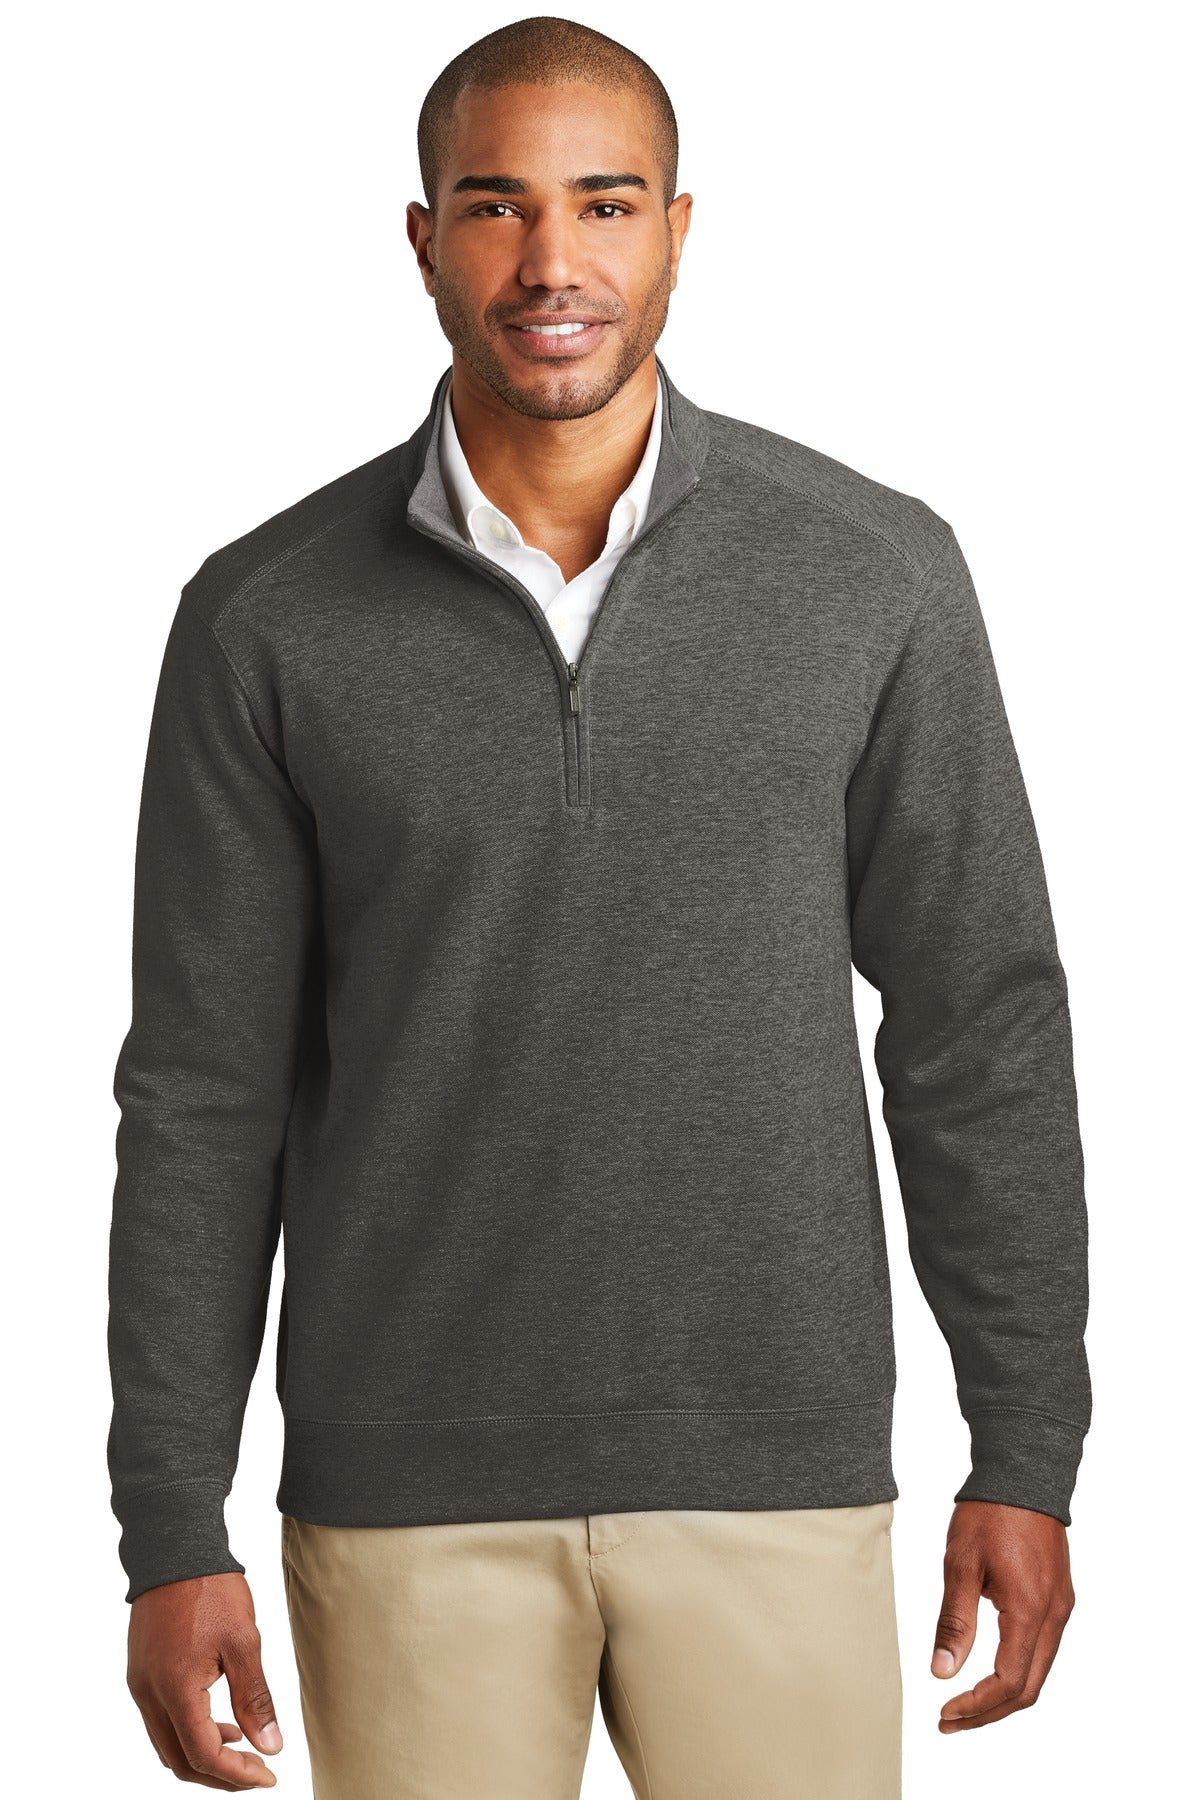 Photo of Port Authority Polos/Knits K807  color  Charcoal Heather/ Medium Heather Grey